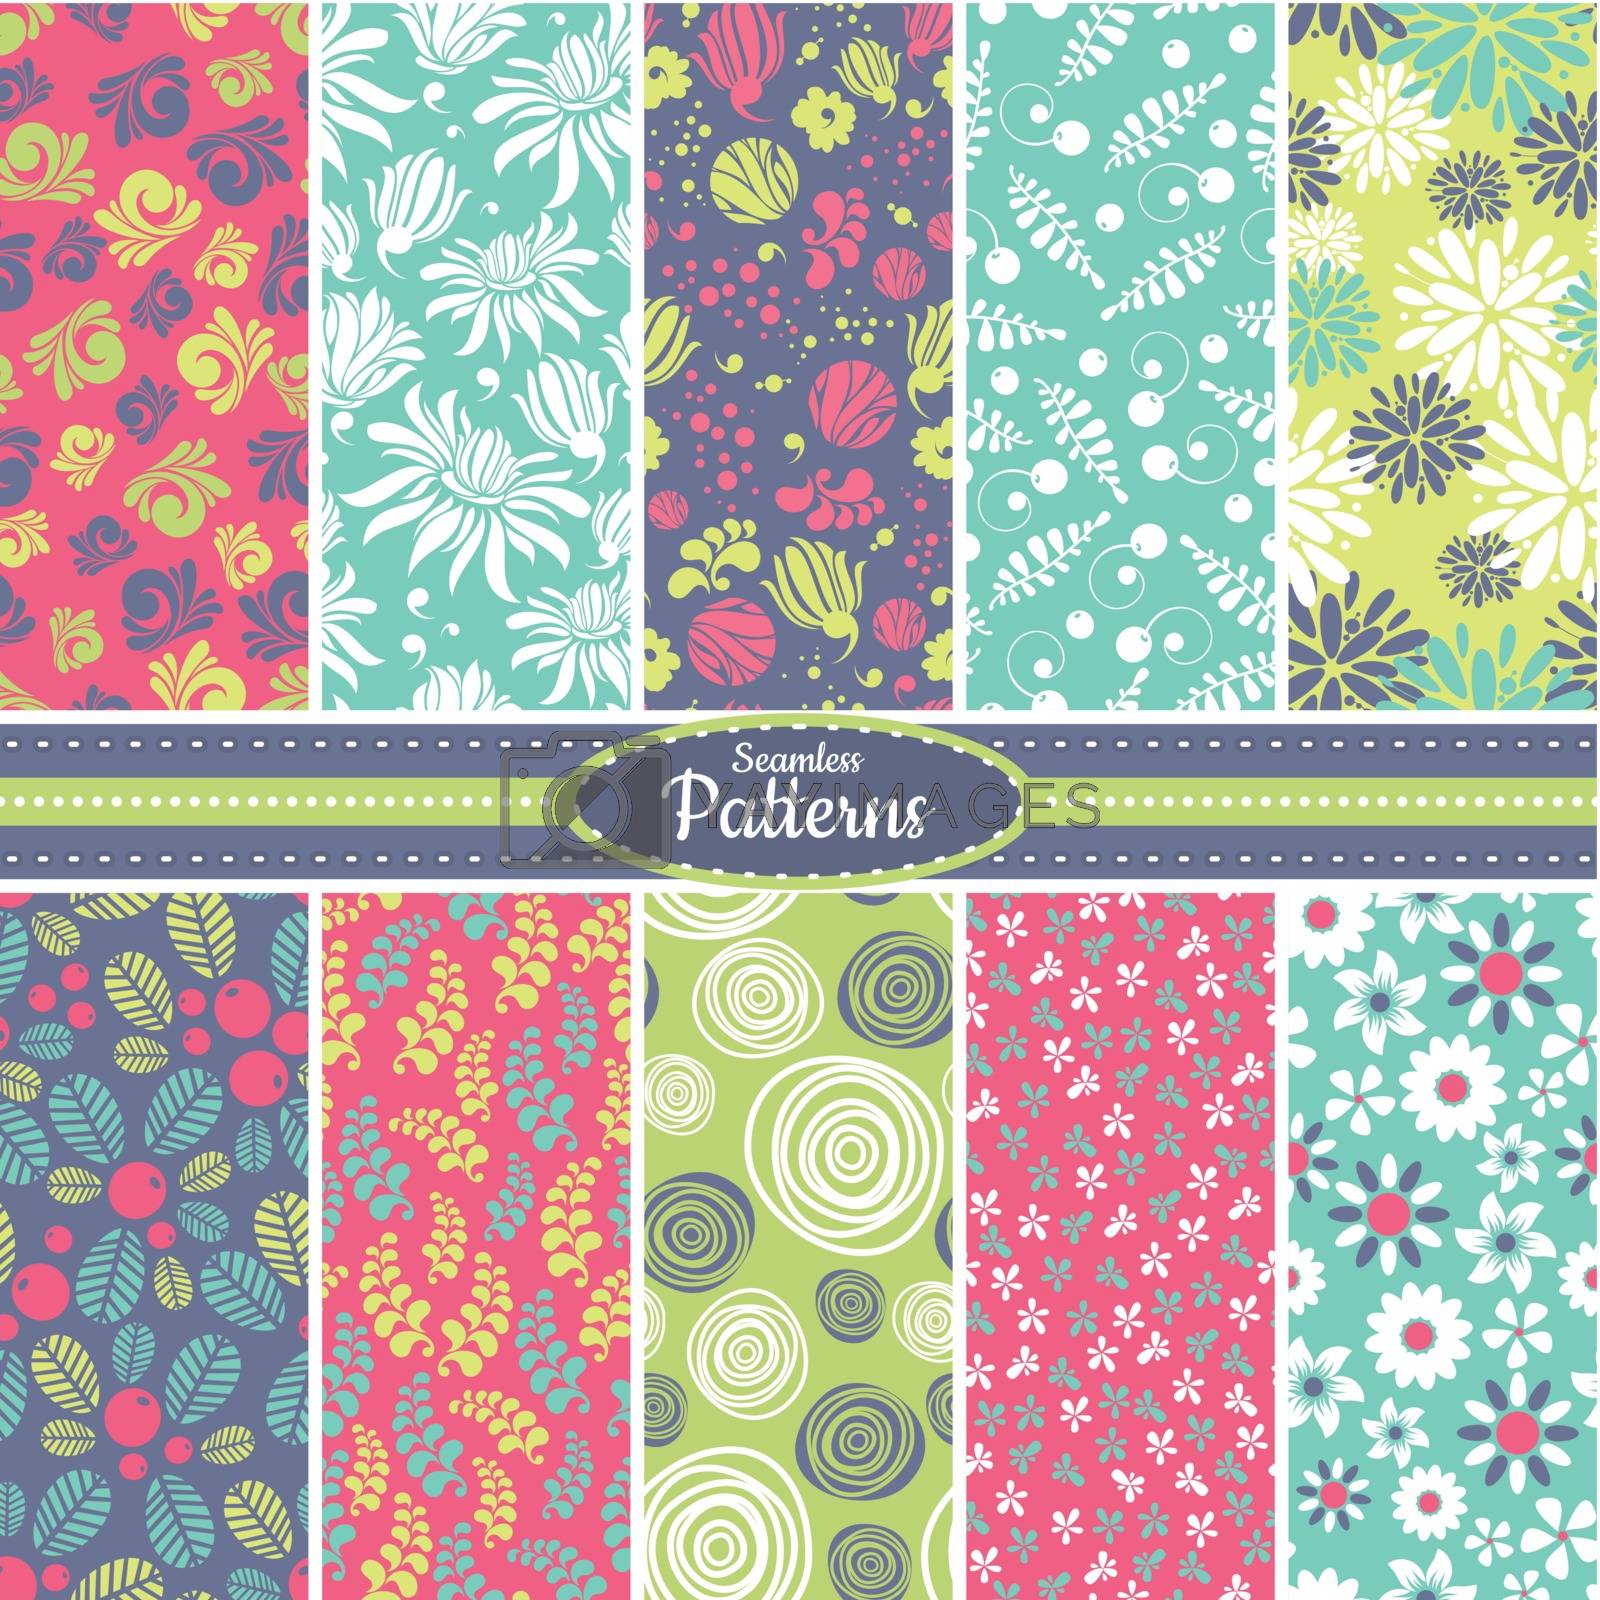 Royalty free image of Collection of seamless pattern backgrounds by SelenaMay